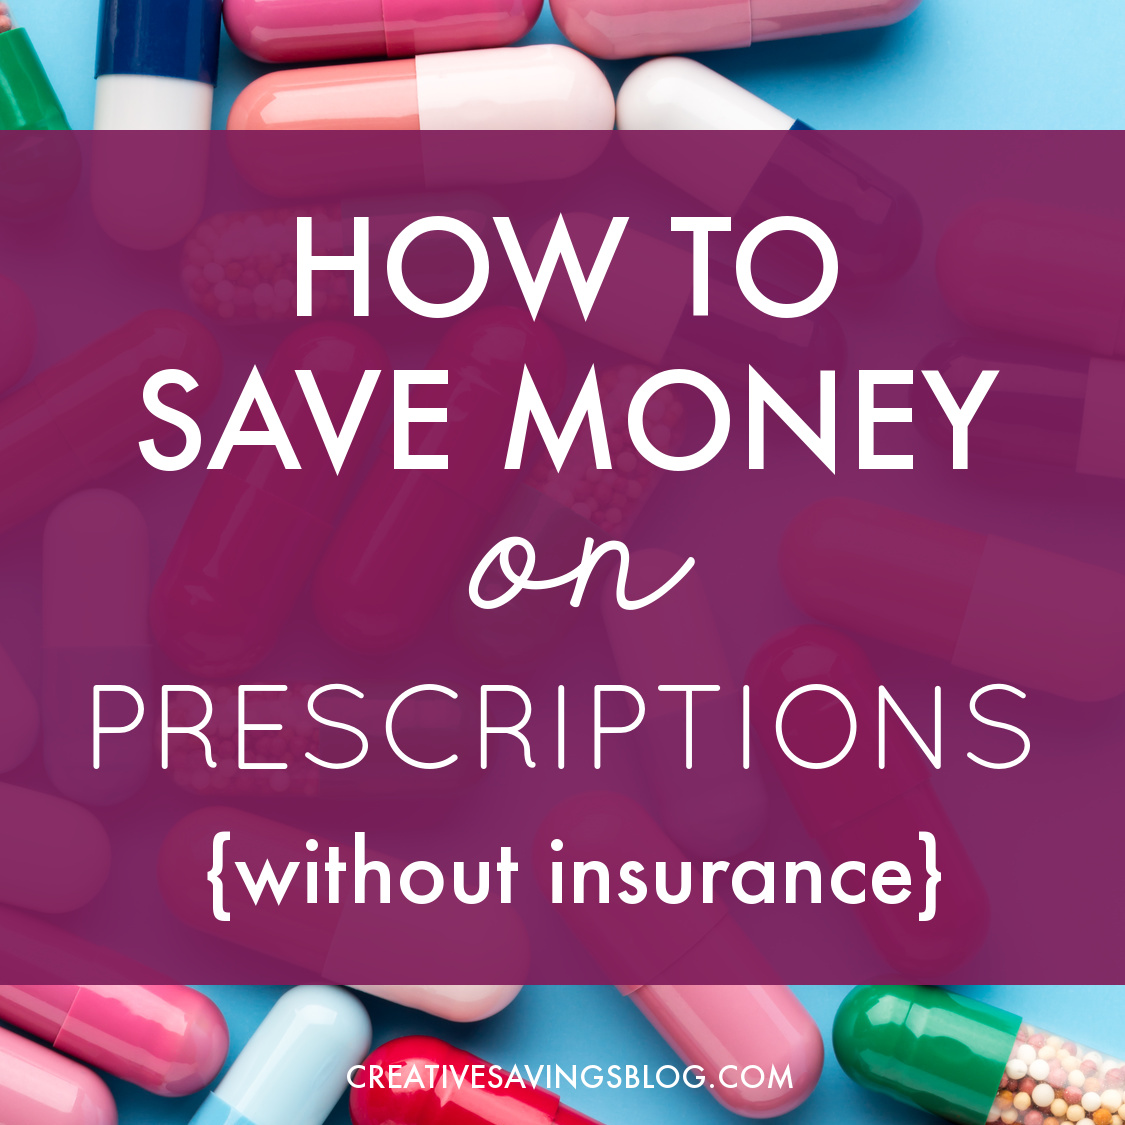 How to Save Money on Prescriptions Without Insurance